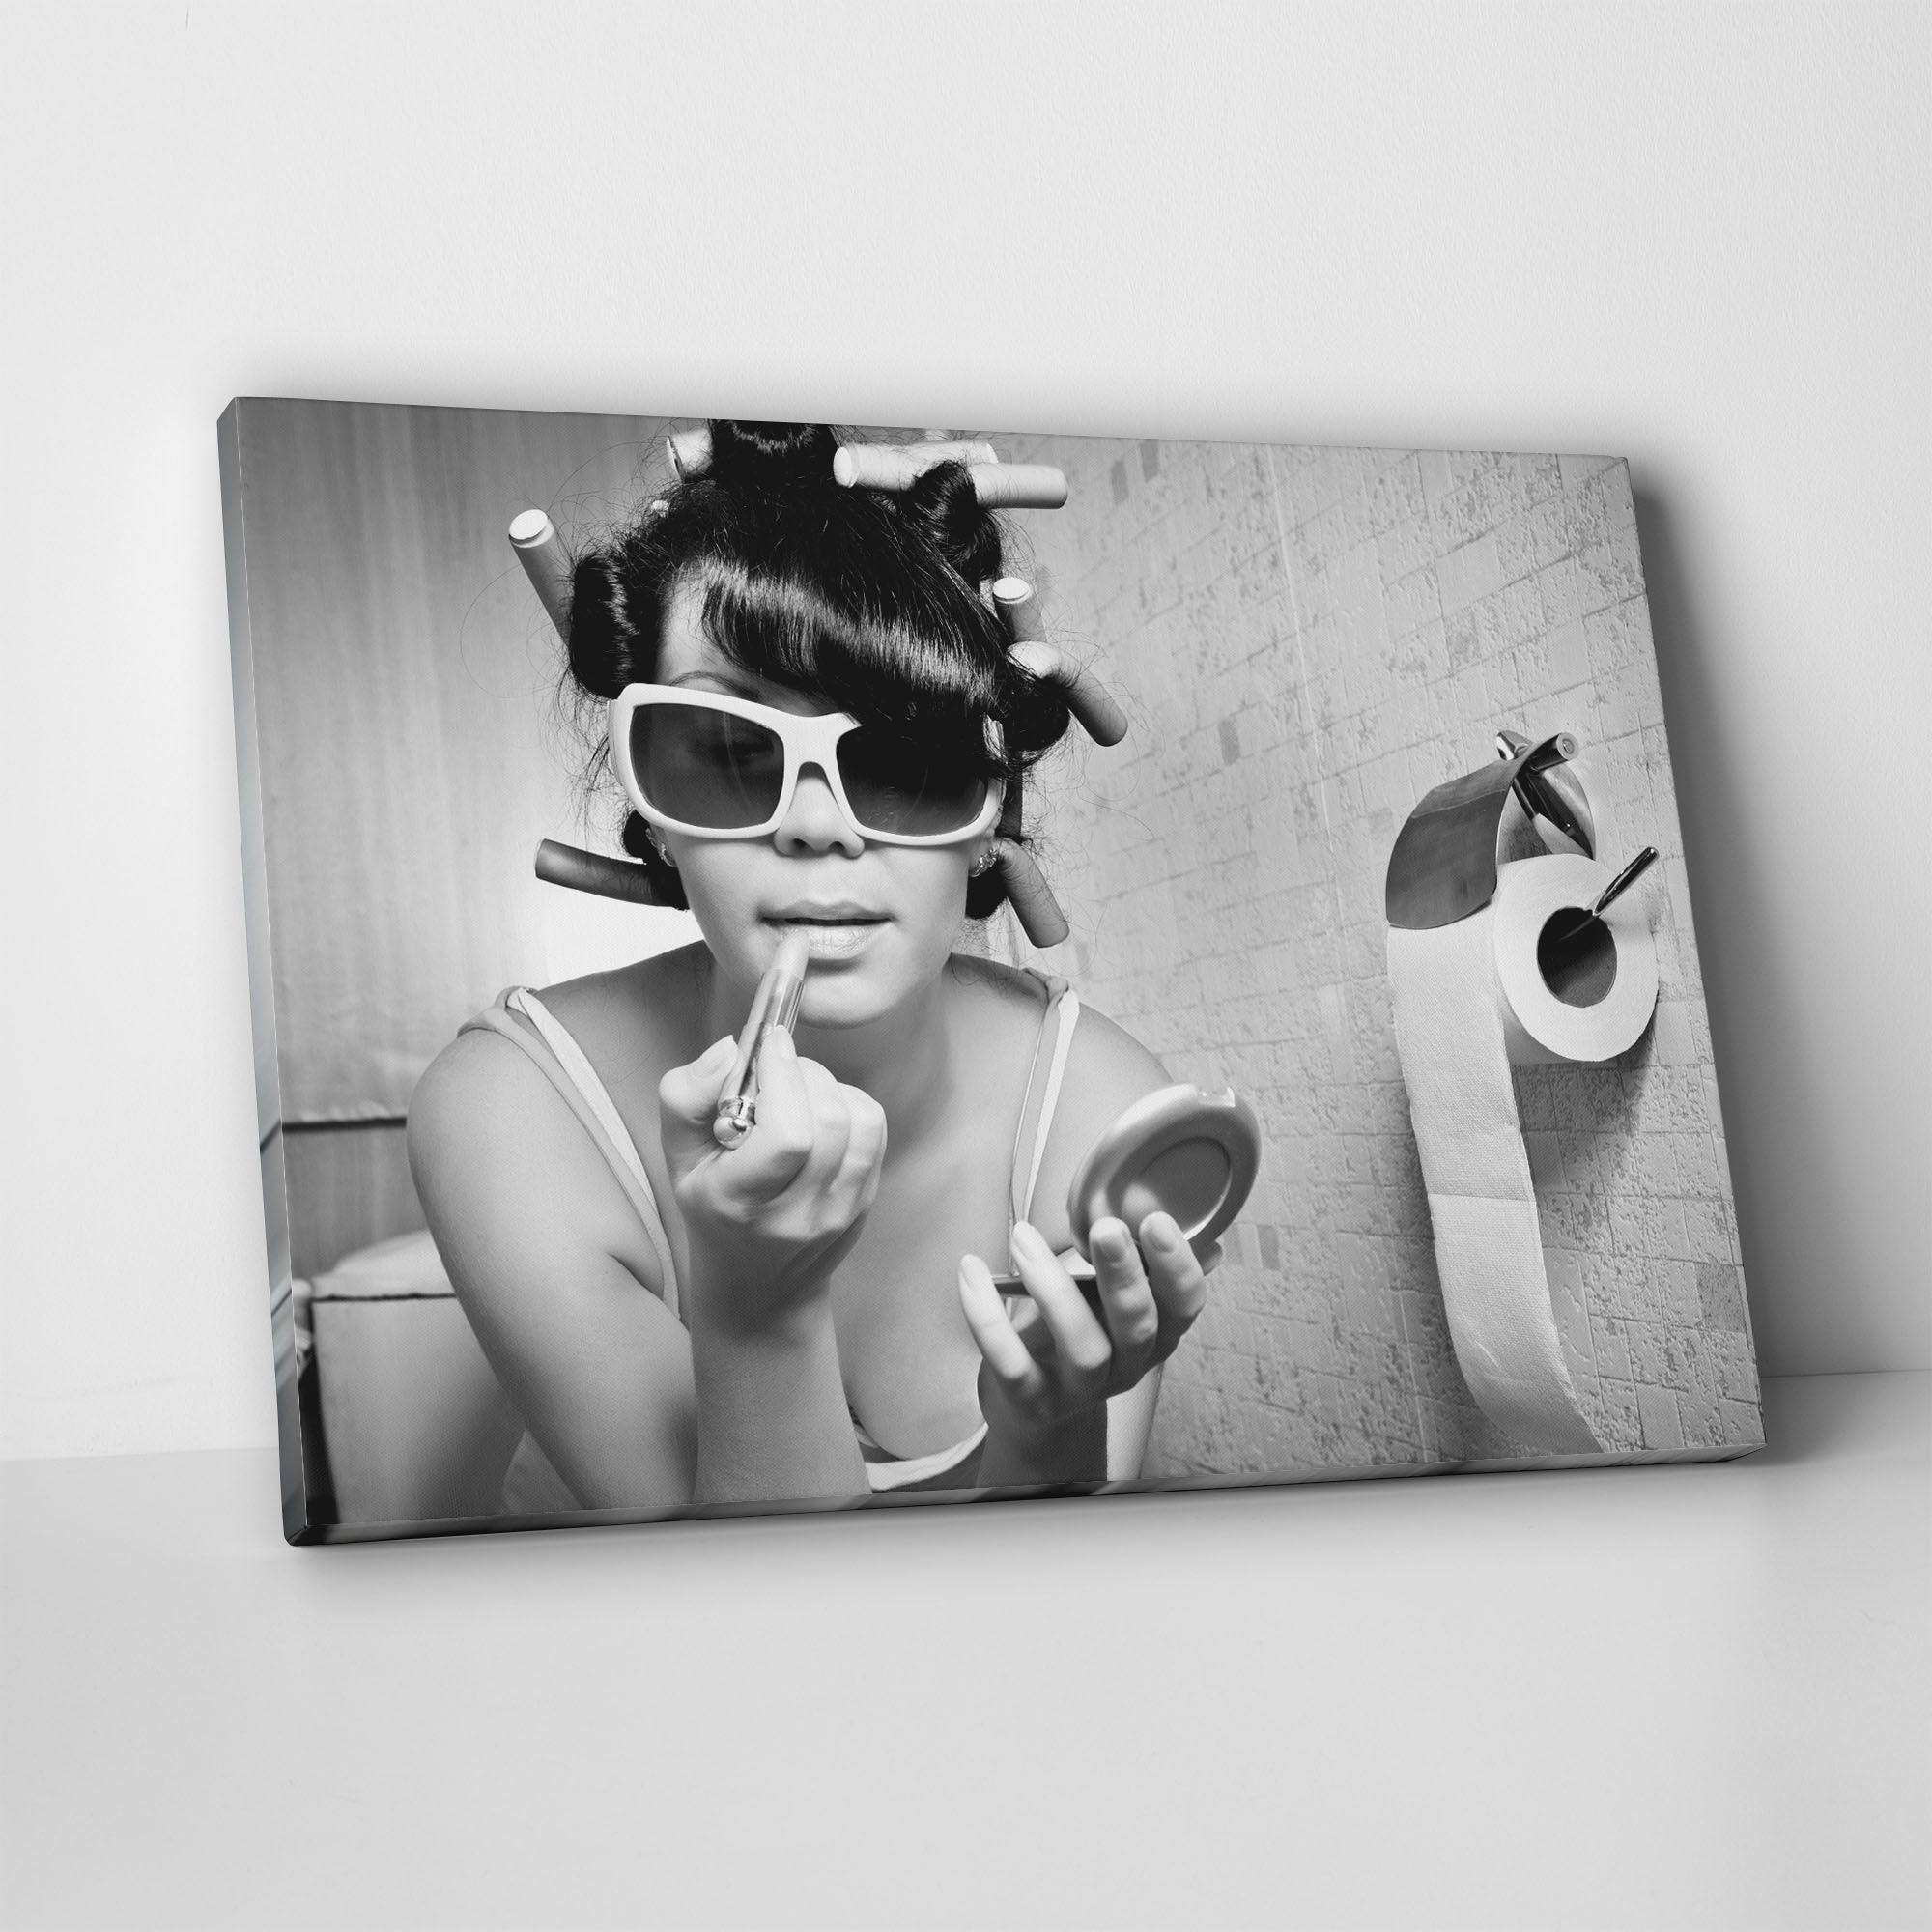 Girl Putting On Makeup Sits In The Toilet Canvas Wall Art - SharpWallArts